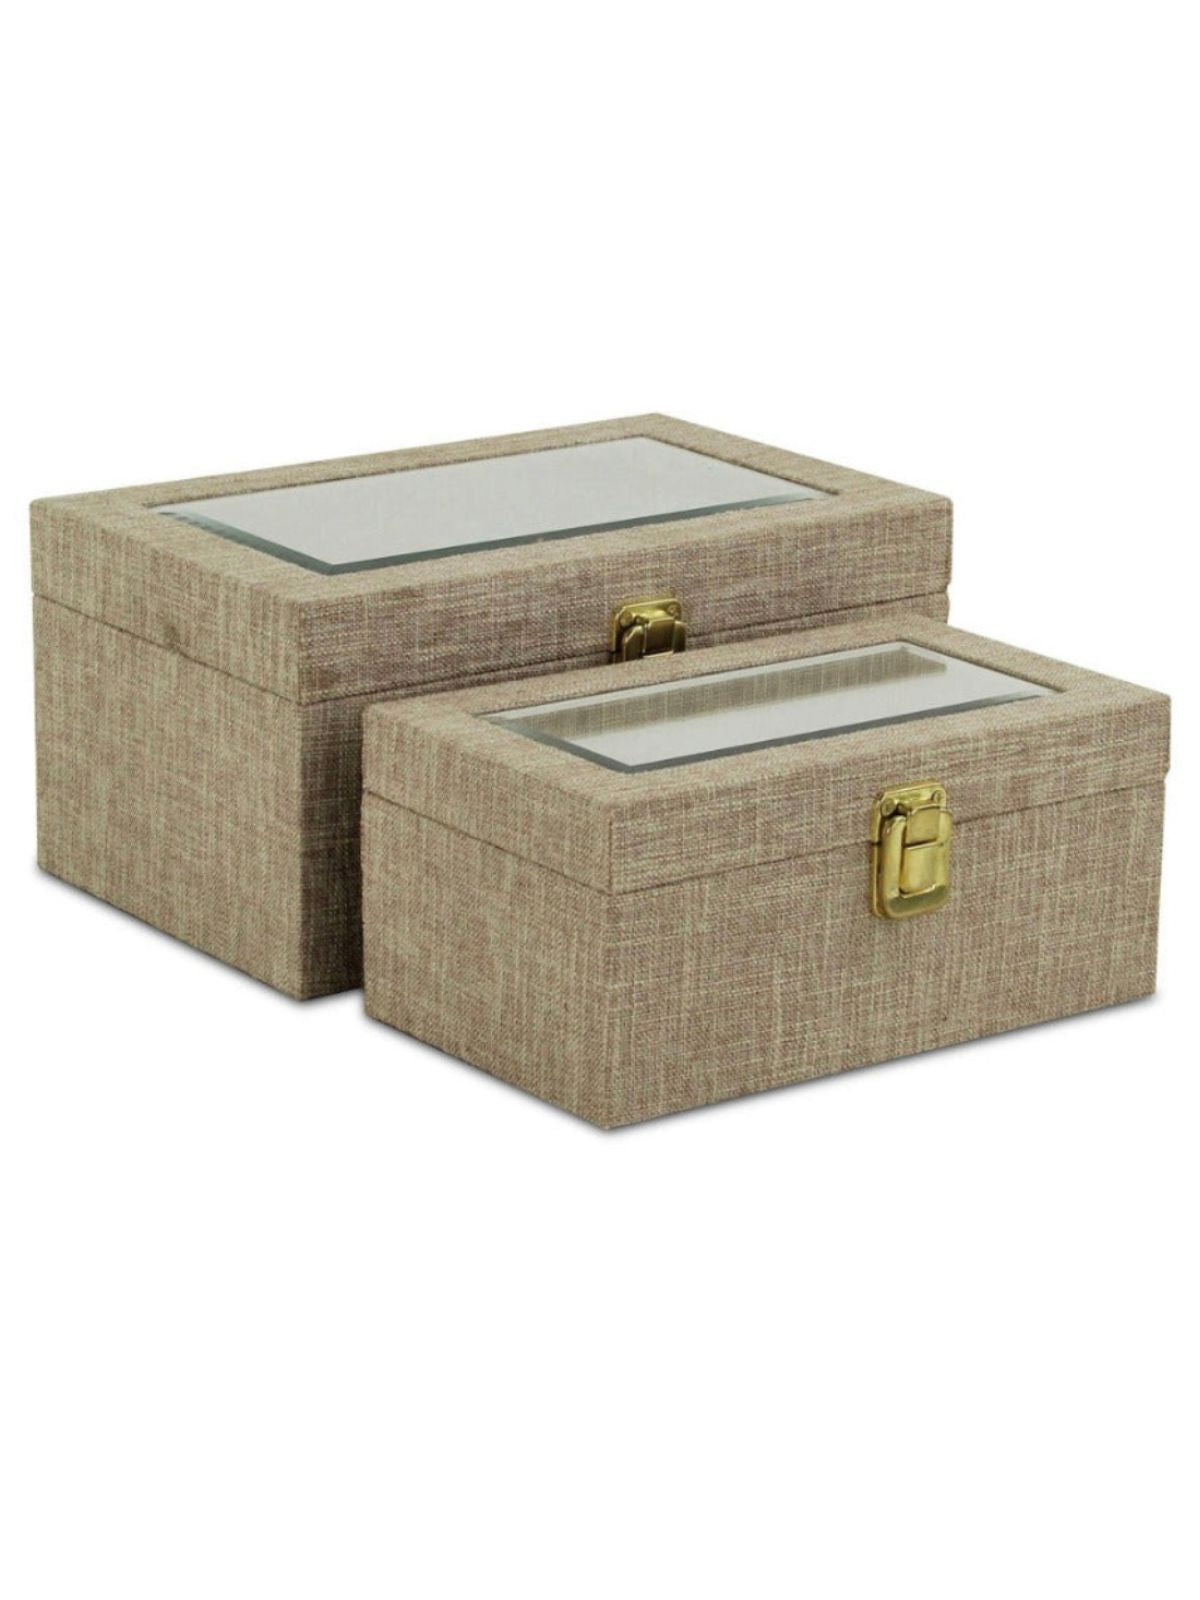 Enhance your living space with a piece that doubles as functional and stylish. The Isola Di Canter Linen two-piece box set highlights a classy fabric overlay that is both modern and clean. 